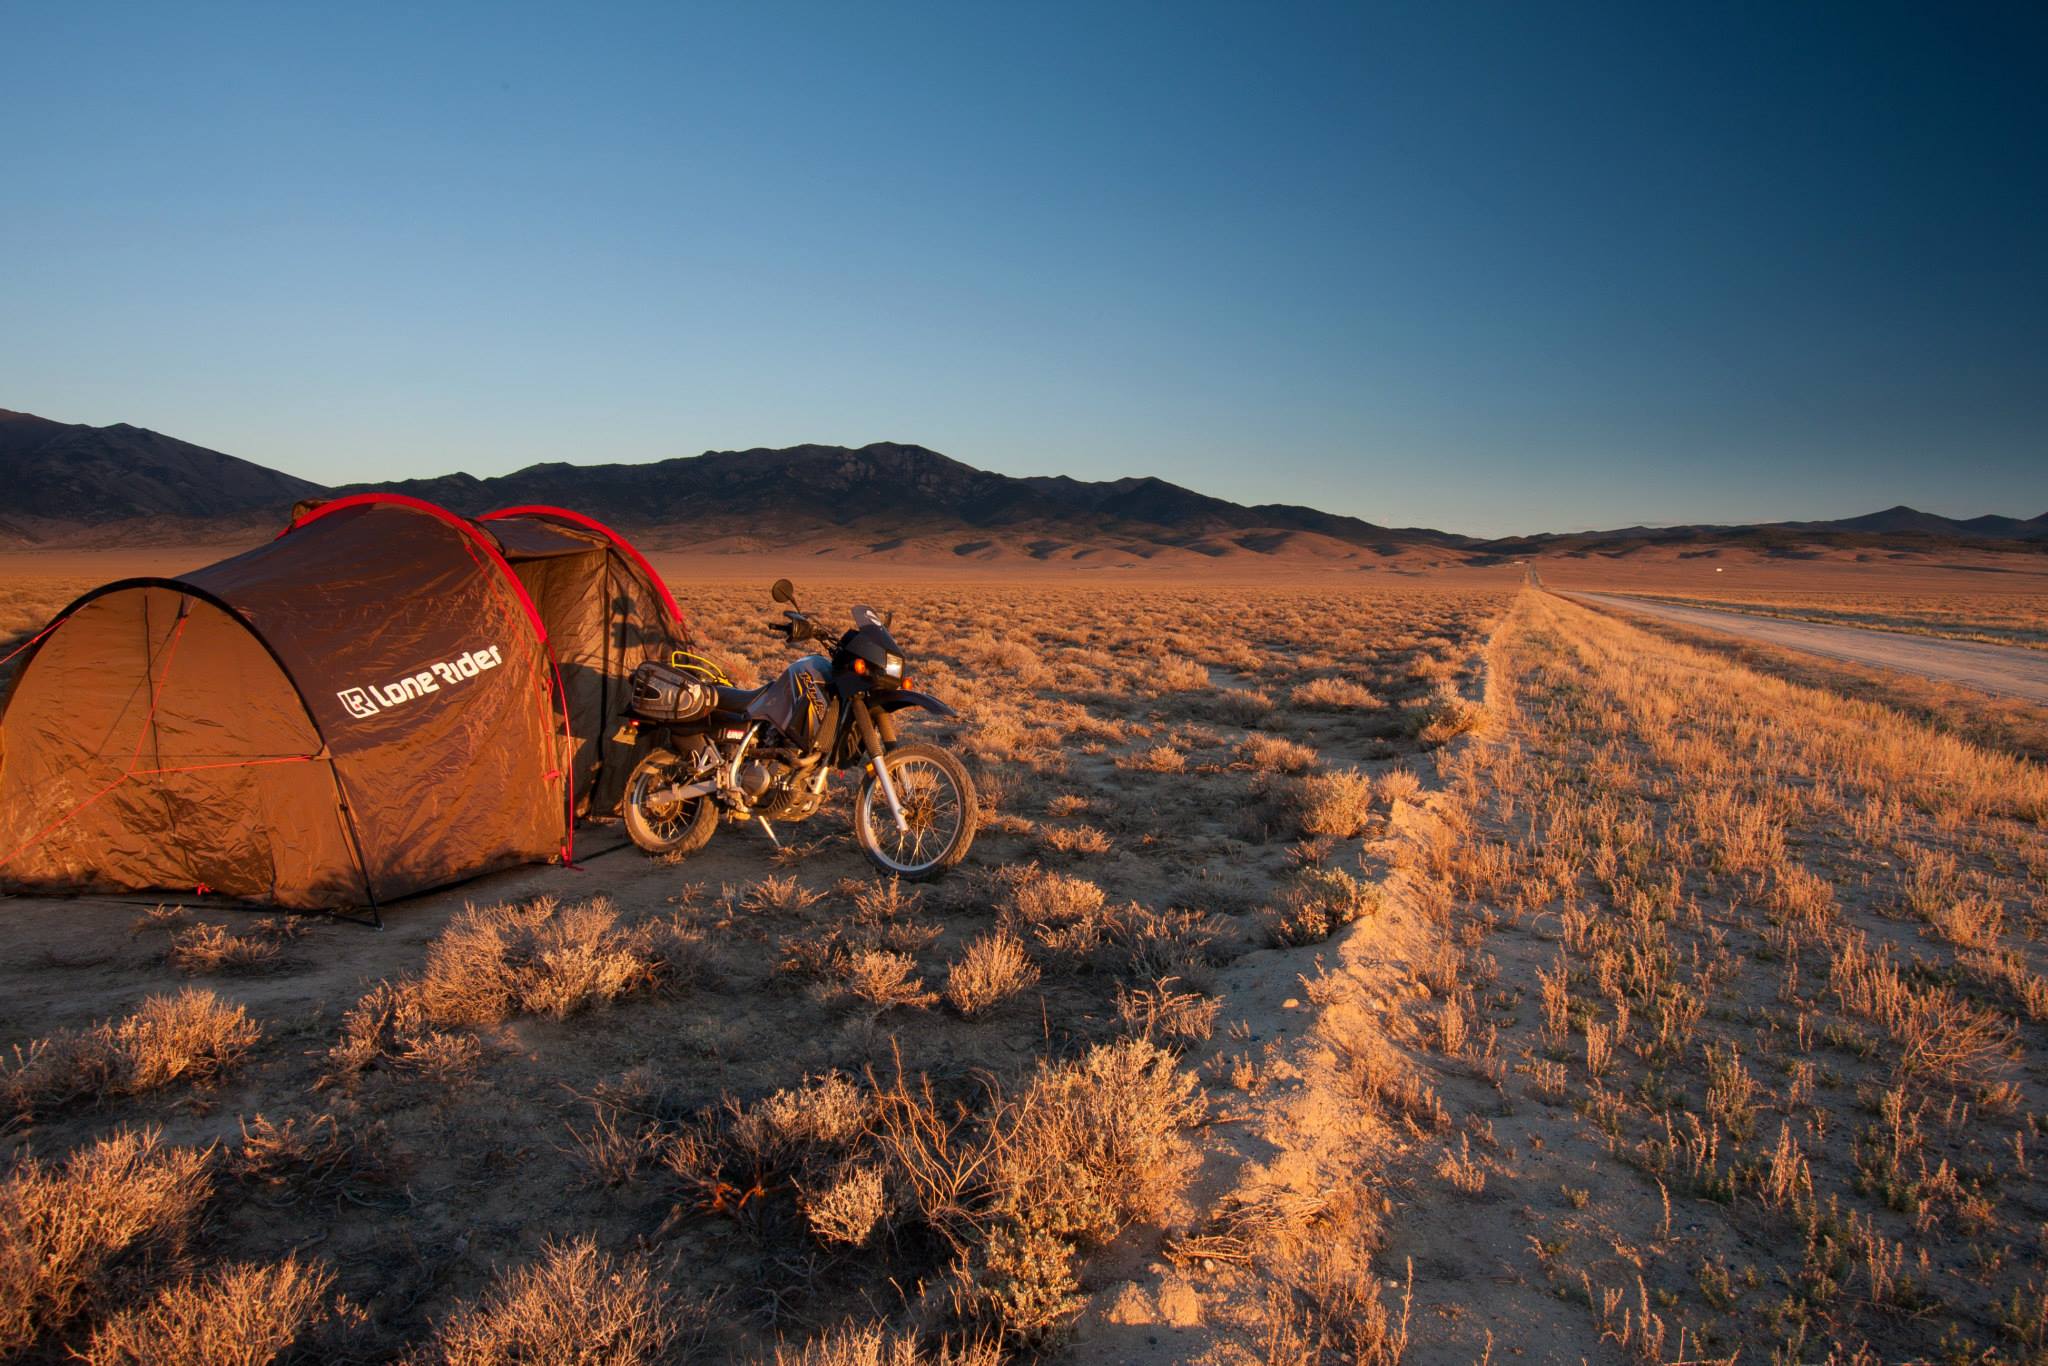 Wild leave no trace motorcycle camping - photo by Lone Rider MotoTent v2 customer